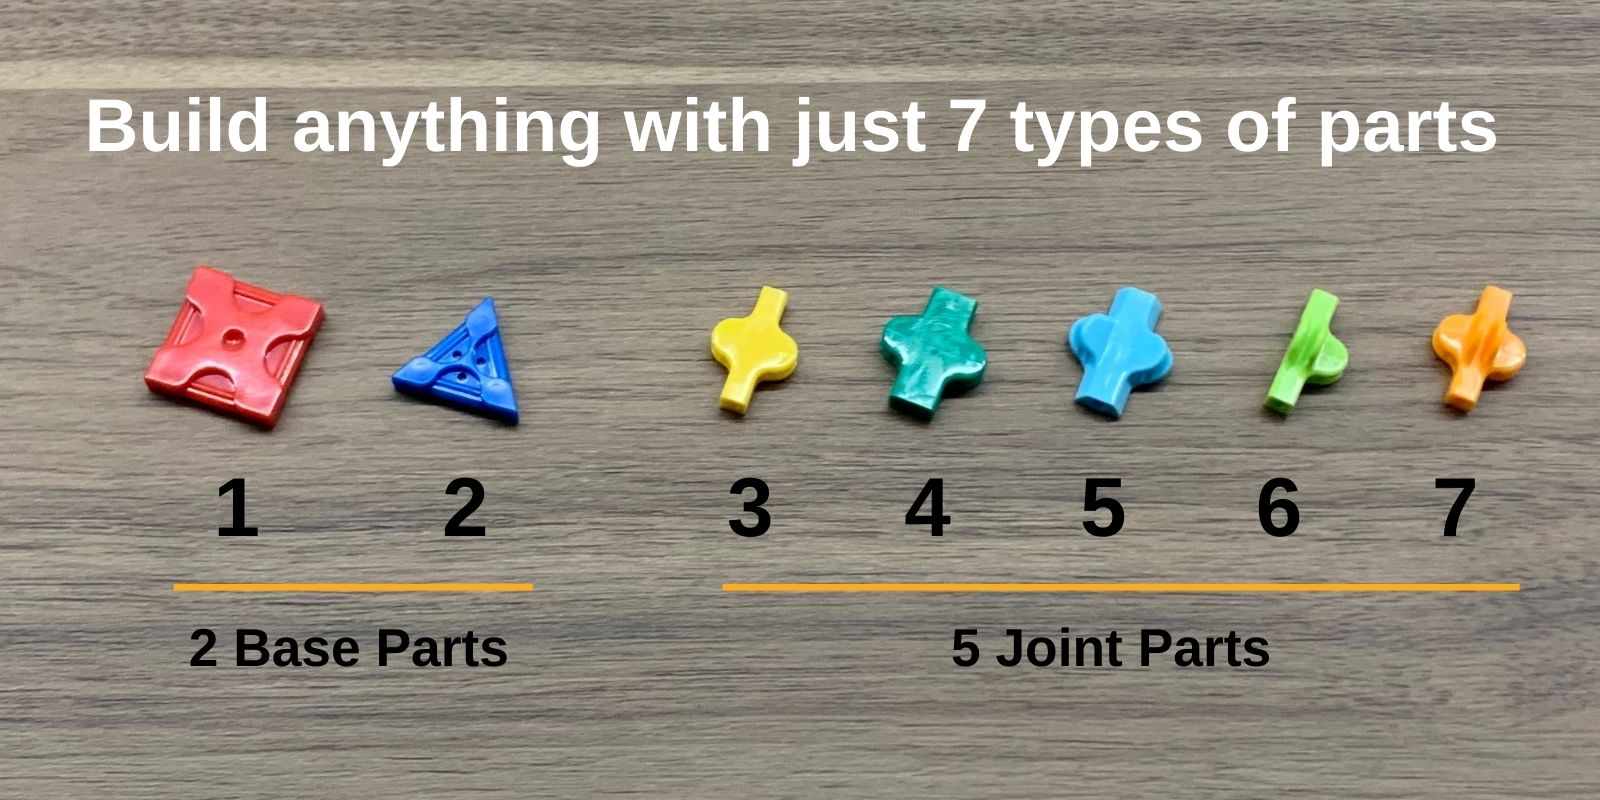 Build anything with just 7 parts